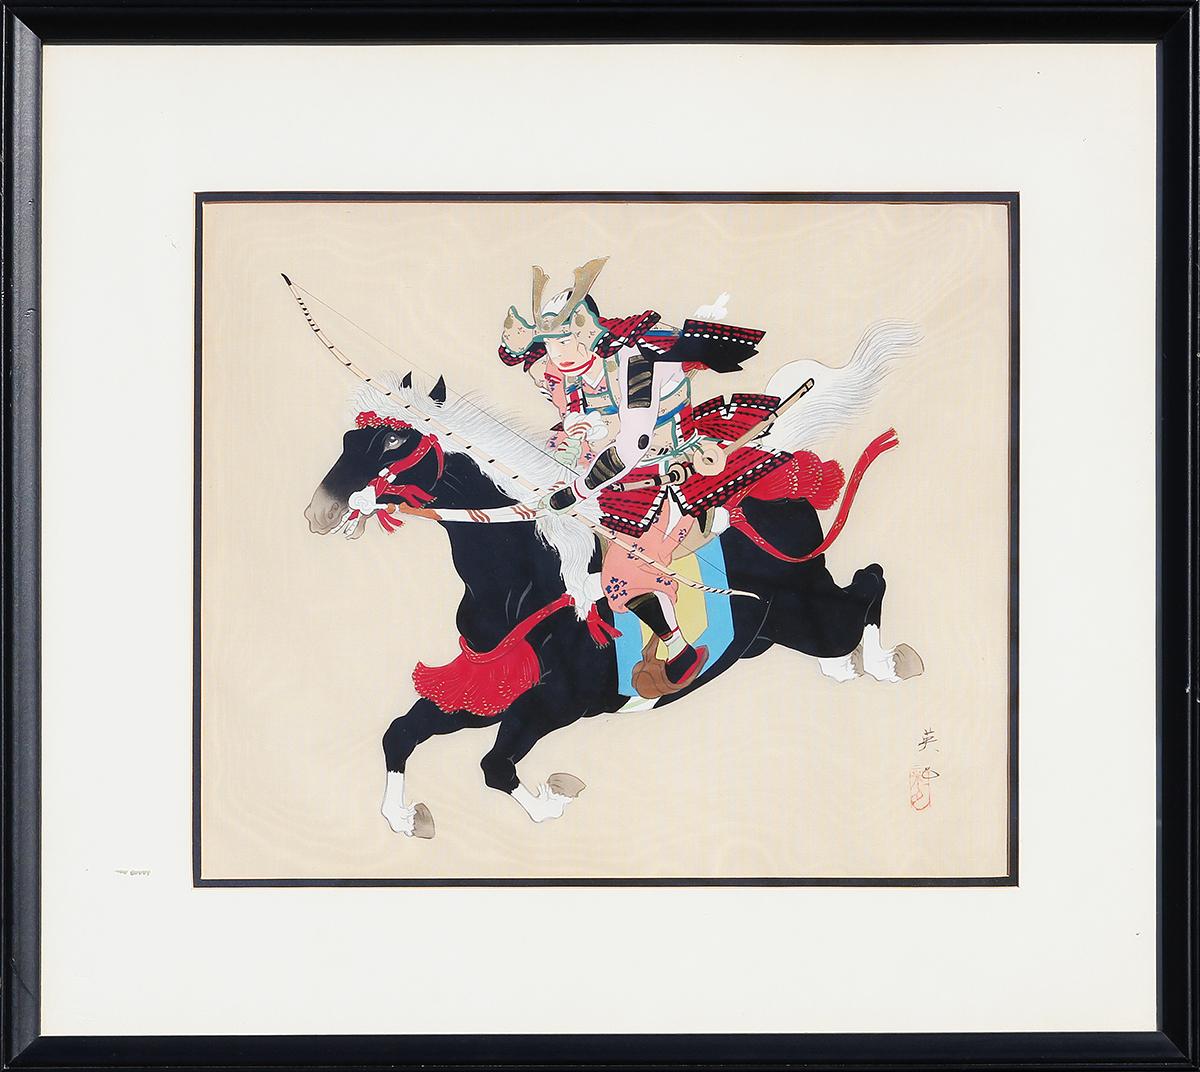 Unknown Animal Print - Hand Painted Print on Silk of a Mounted Samurai Warrior on Horseback with Bow 